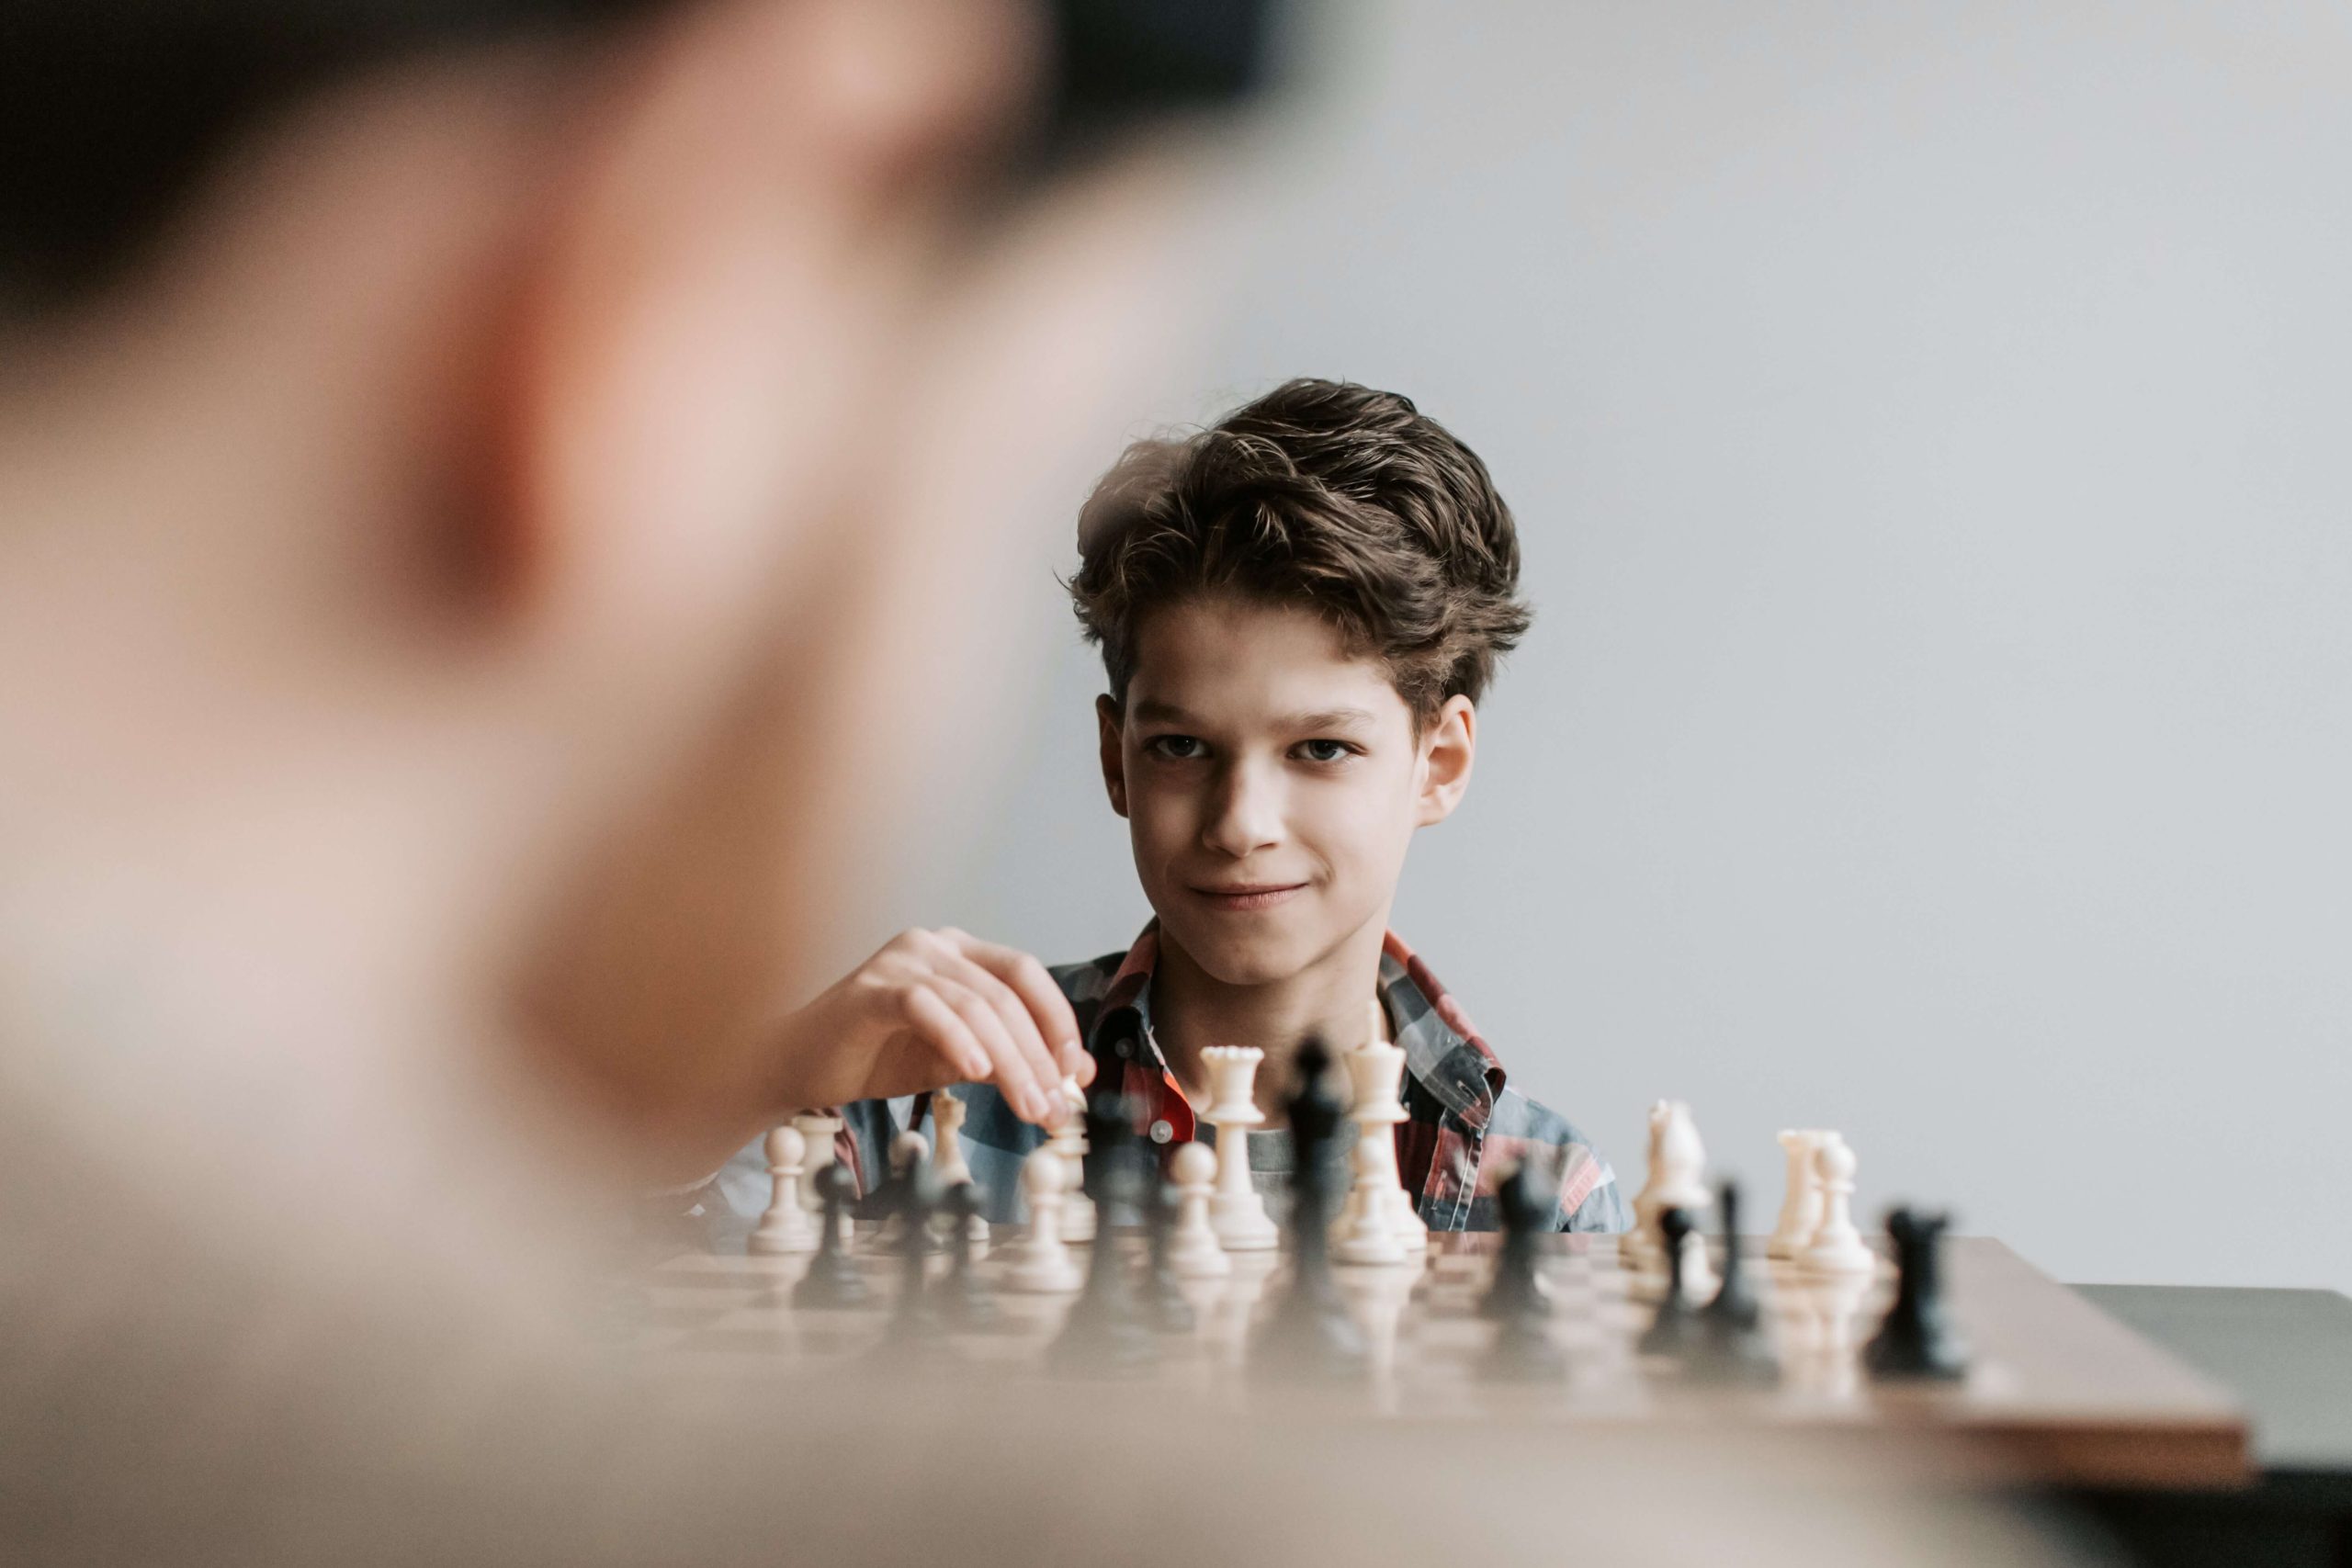 Tips for getting good at chess